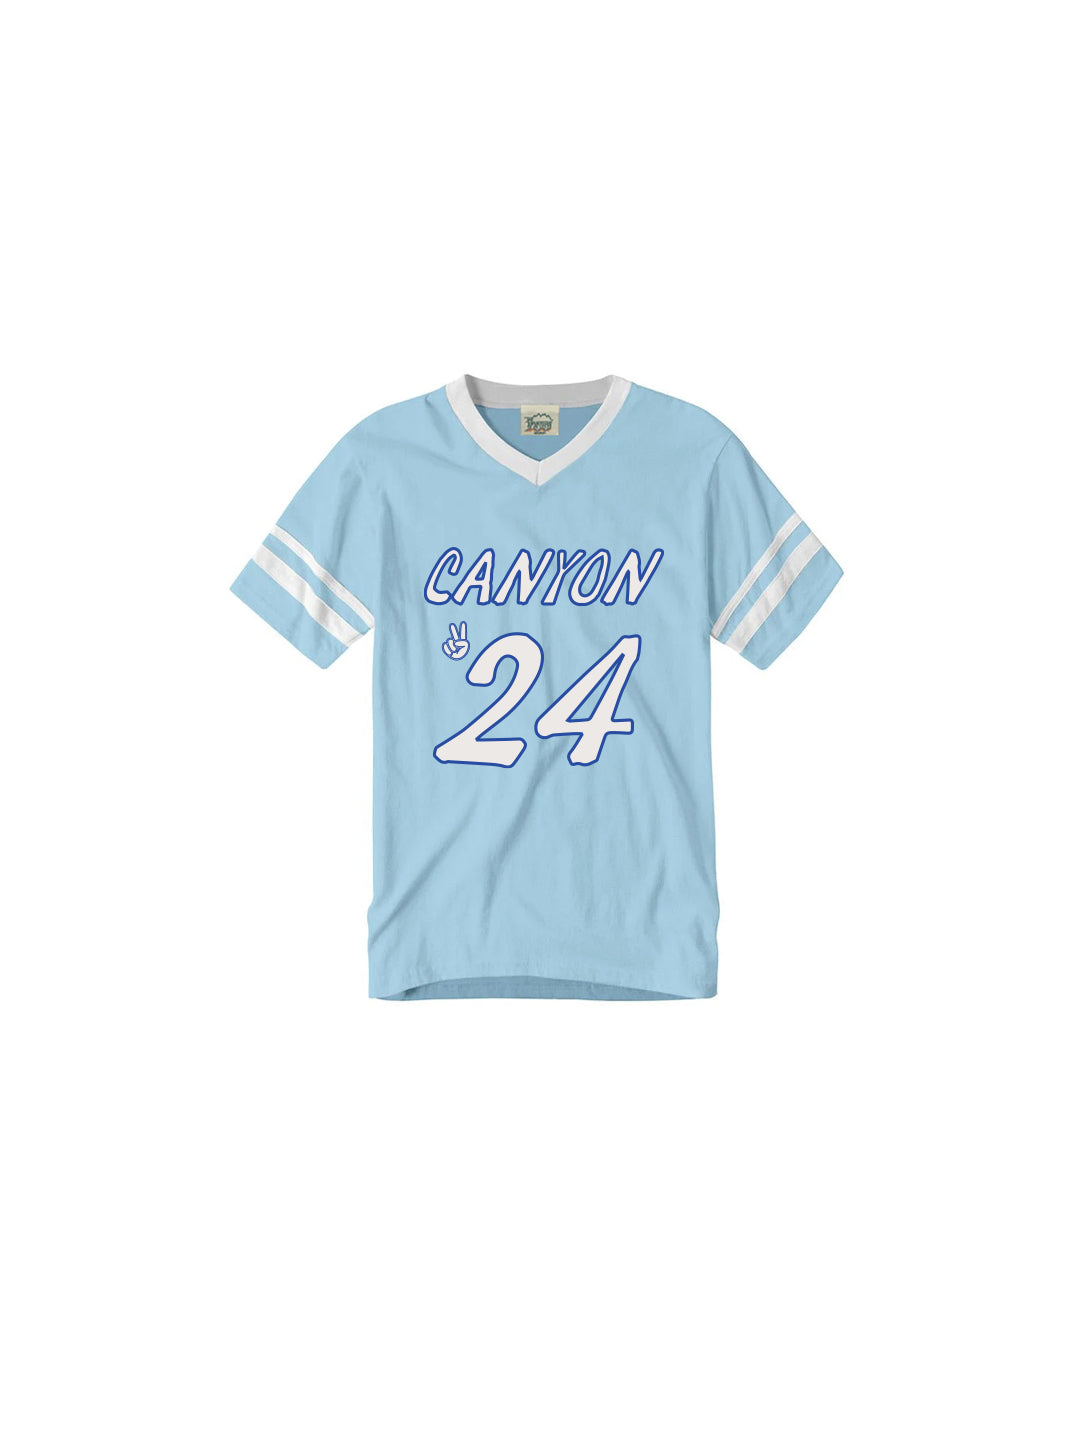 Canyon '24 Youth Track Tee in Dusty Blue